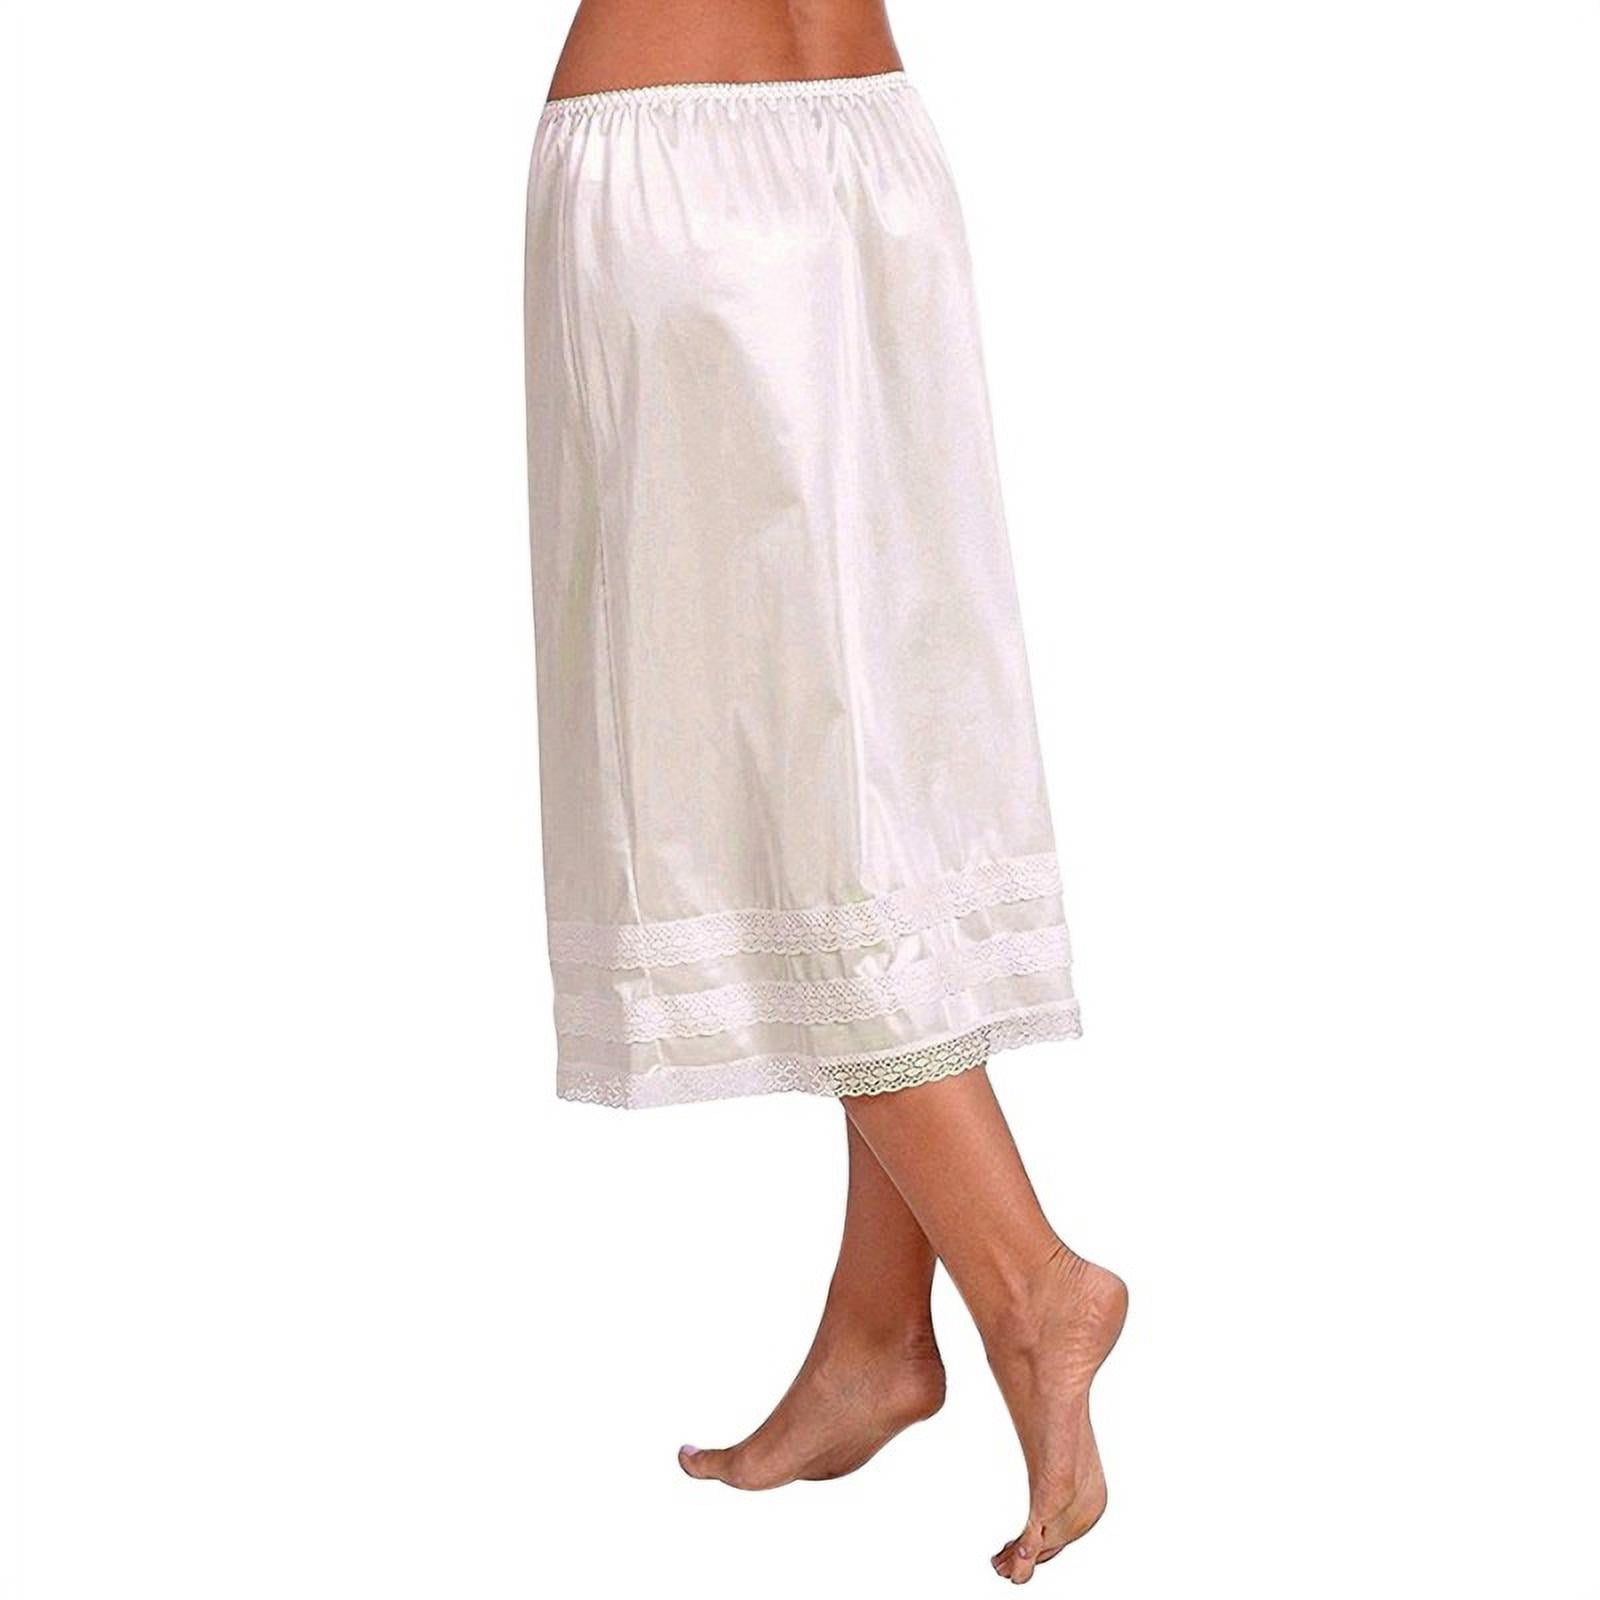 Modal Half Slip Safety High Waisted Pleated Skirt Petticoat Underskirt For  Women Comfortable Underdress In Black, White, Or Nude 40cm 60cm Style 903  B636 From Bai01, $11.71